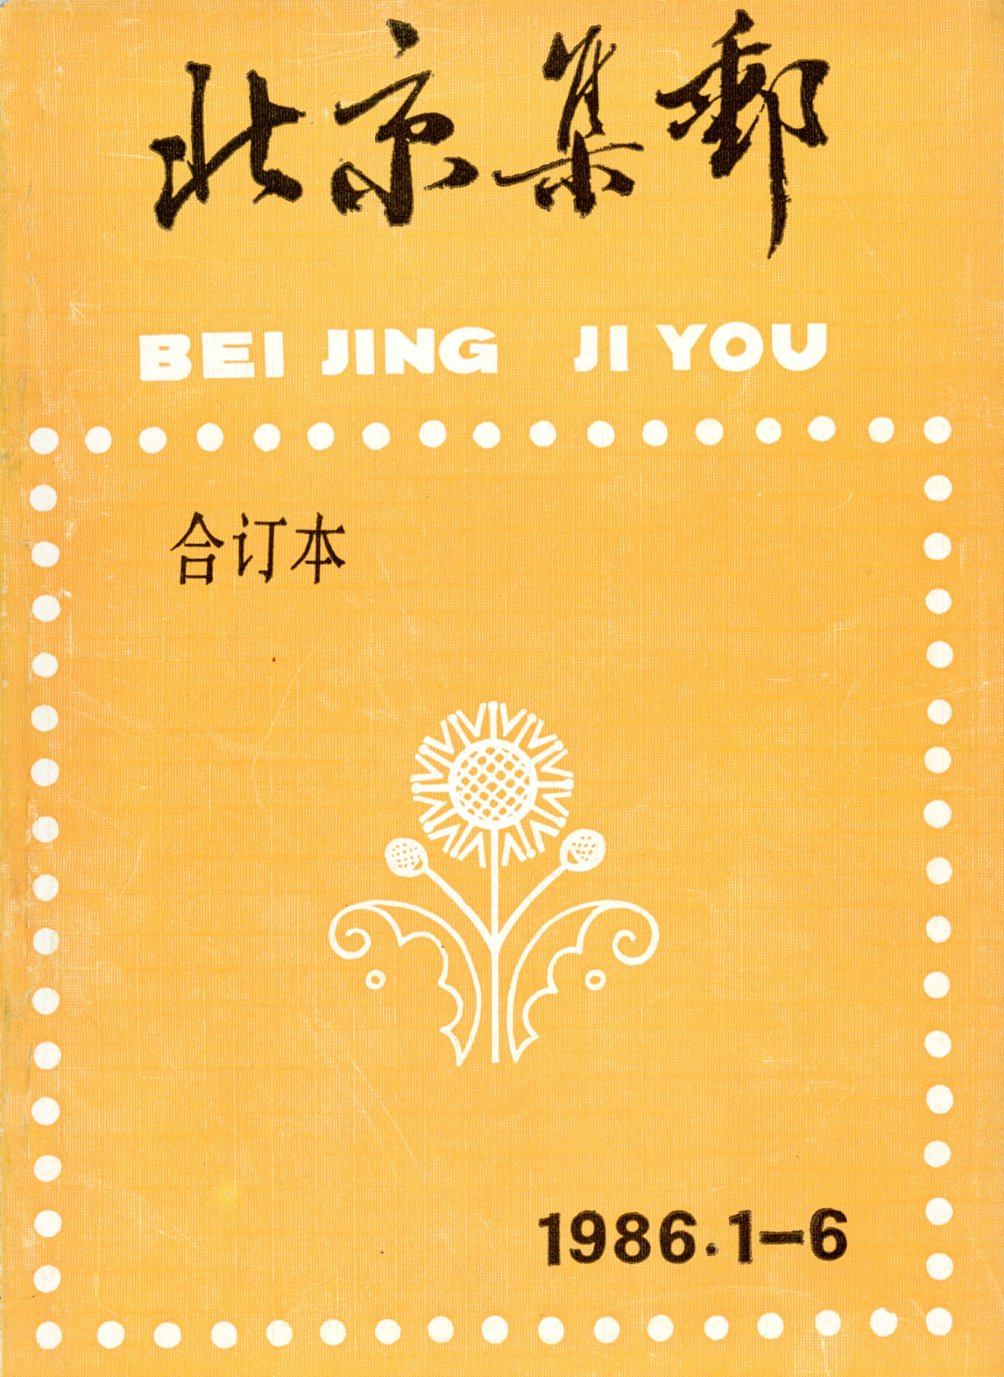 Beijing Jiyou (Beijing Philately), Nos. 14-19 (1996), in one softbound volume, in Chinese, cover somewhat soiled, otherwise in good condition (14 oz)